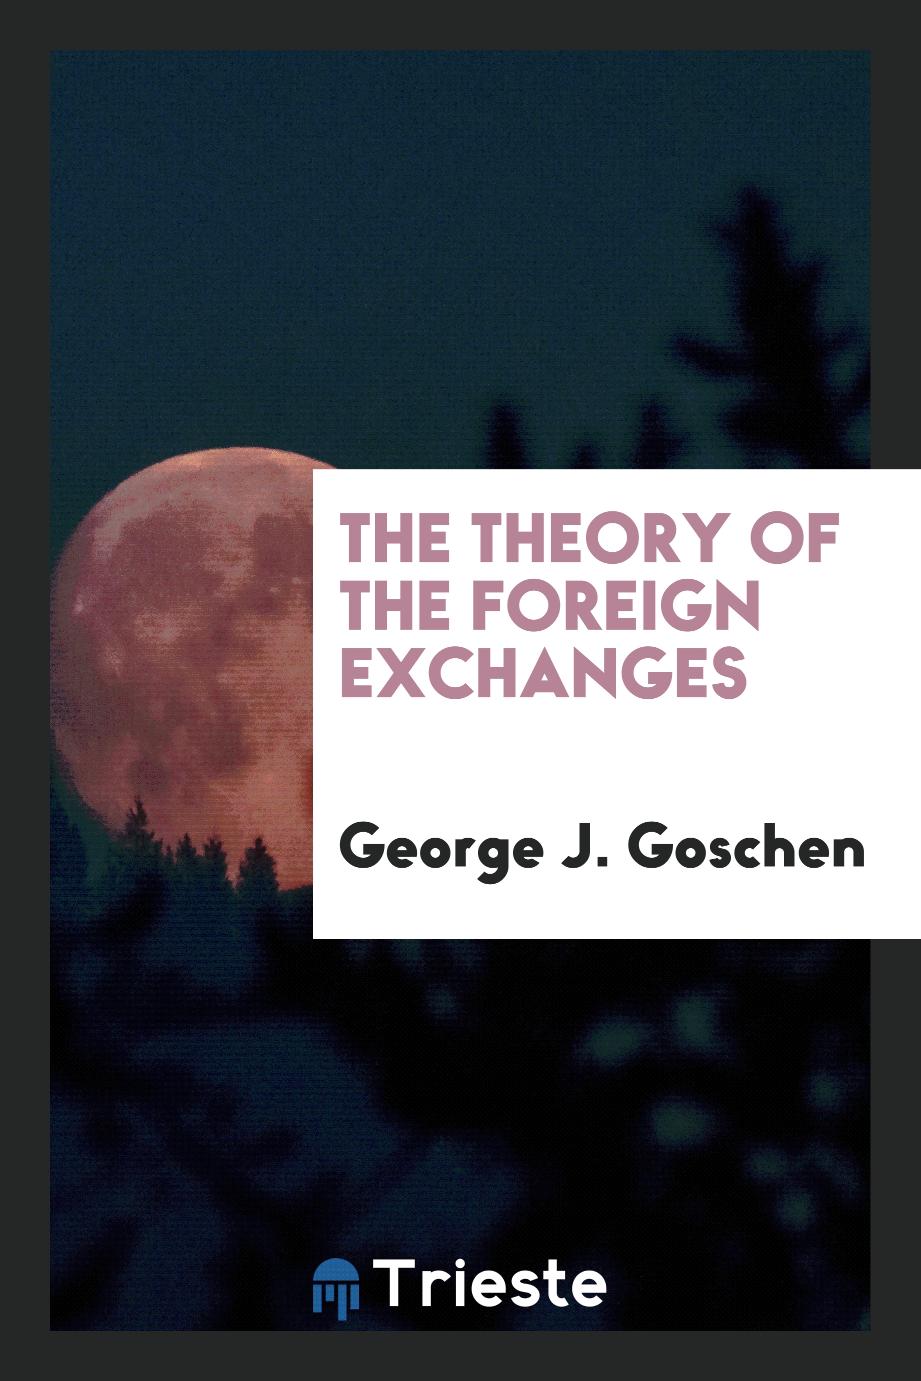 The theory of the foreign exchanges